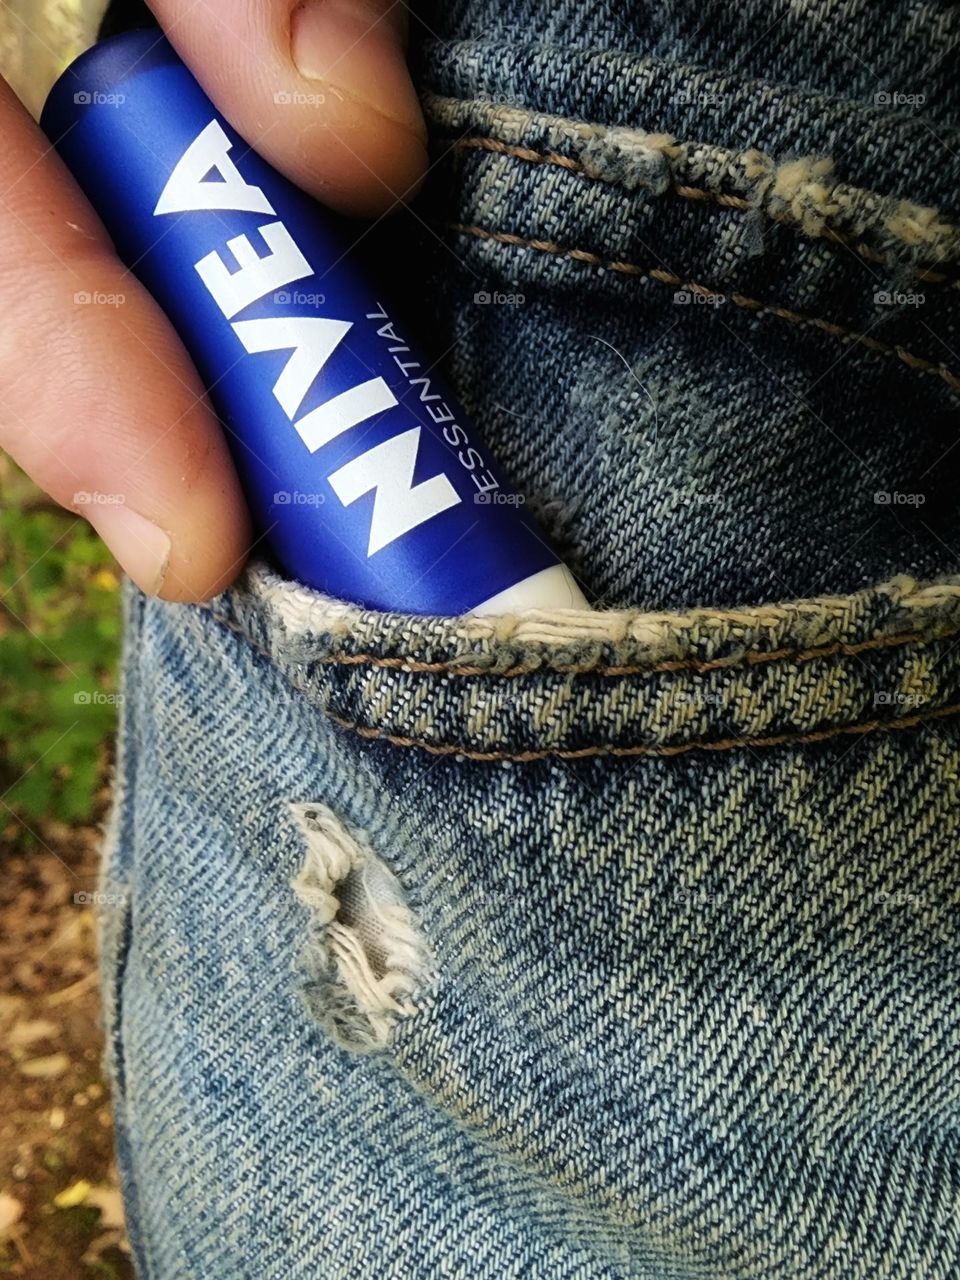 Bringing my Nivea essential lip chap with me in my jeans pocket.